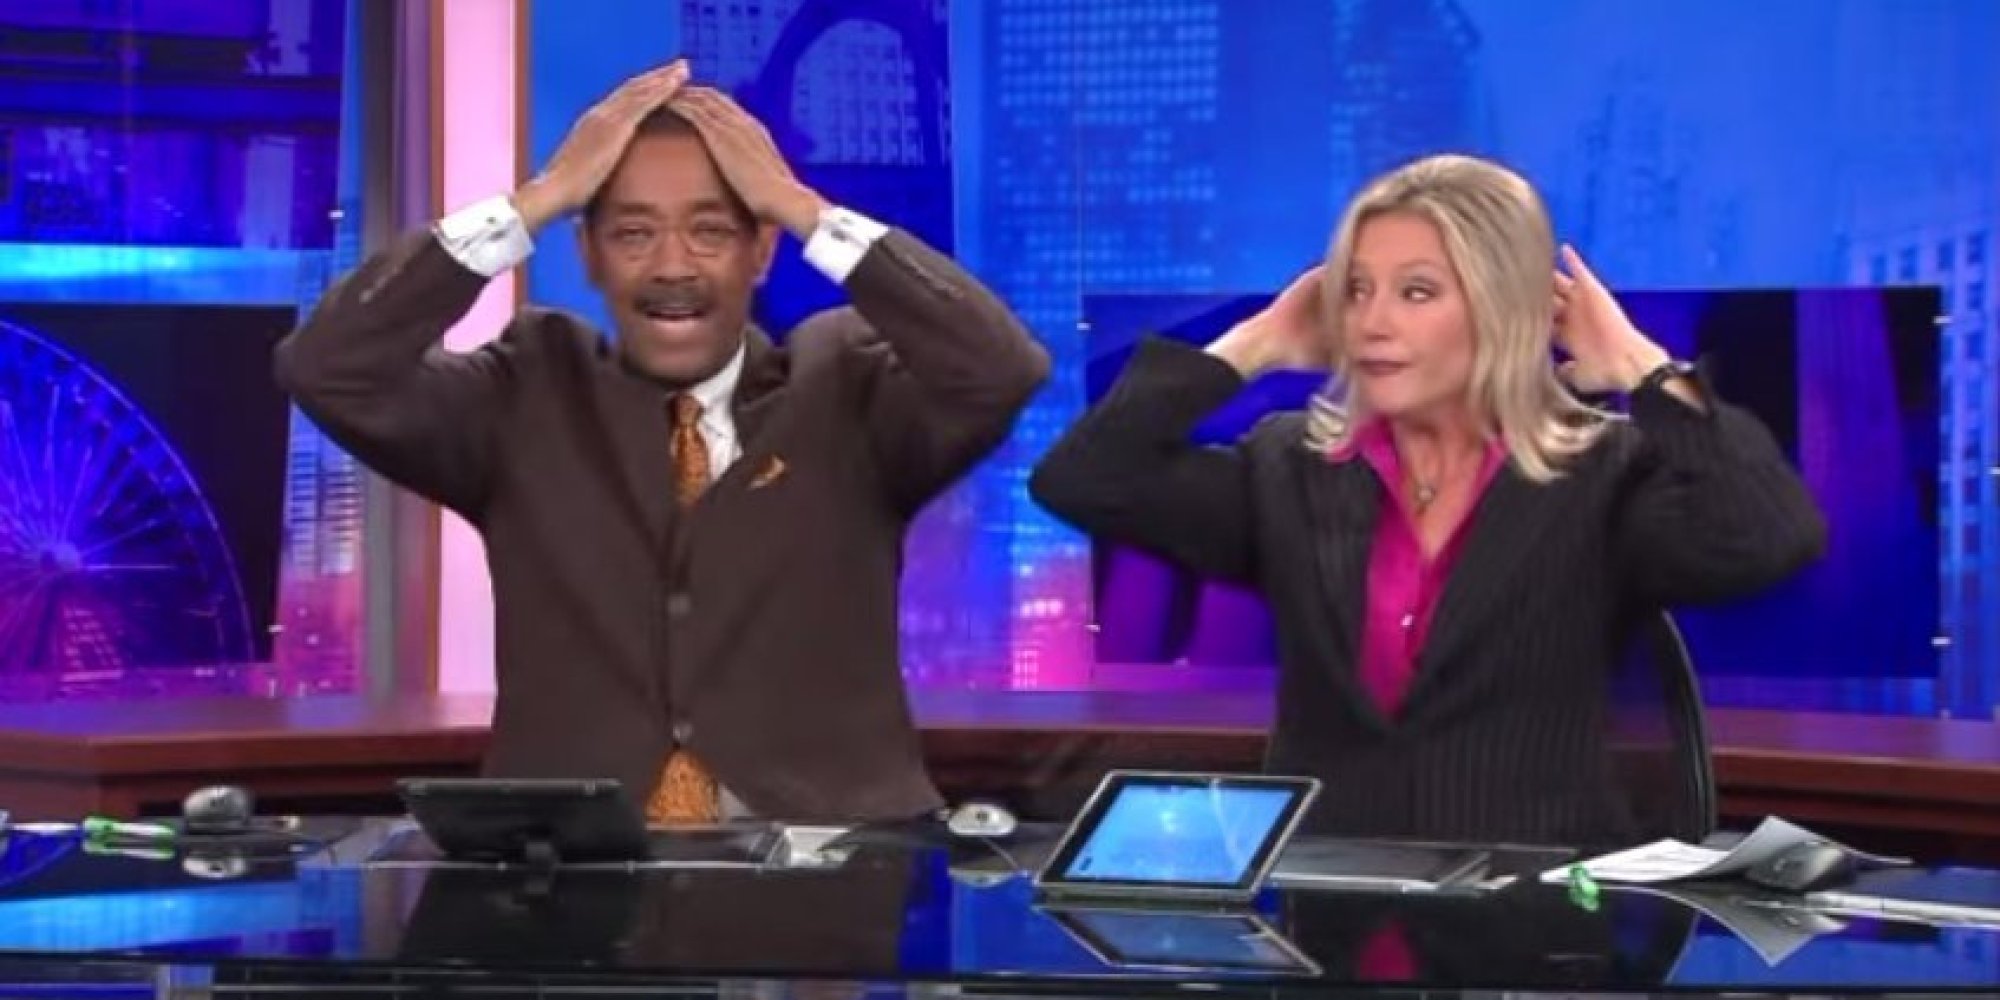 Two News Anchors Perform The Most Complicated Handshake